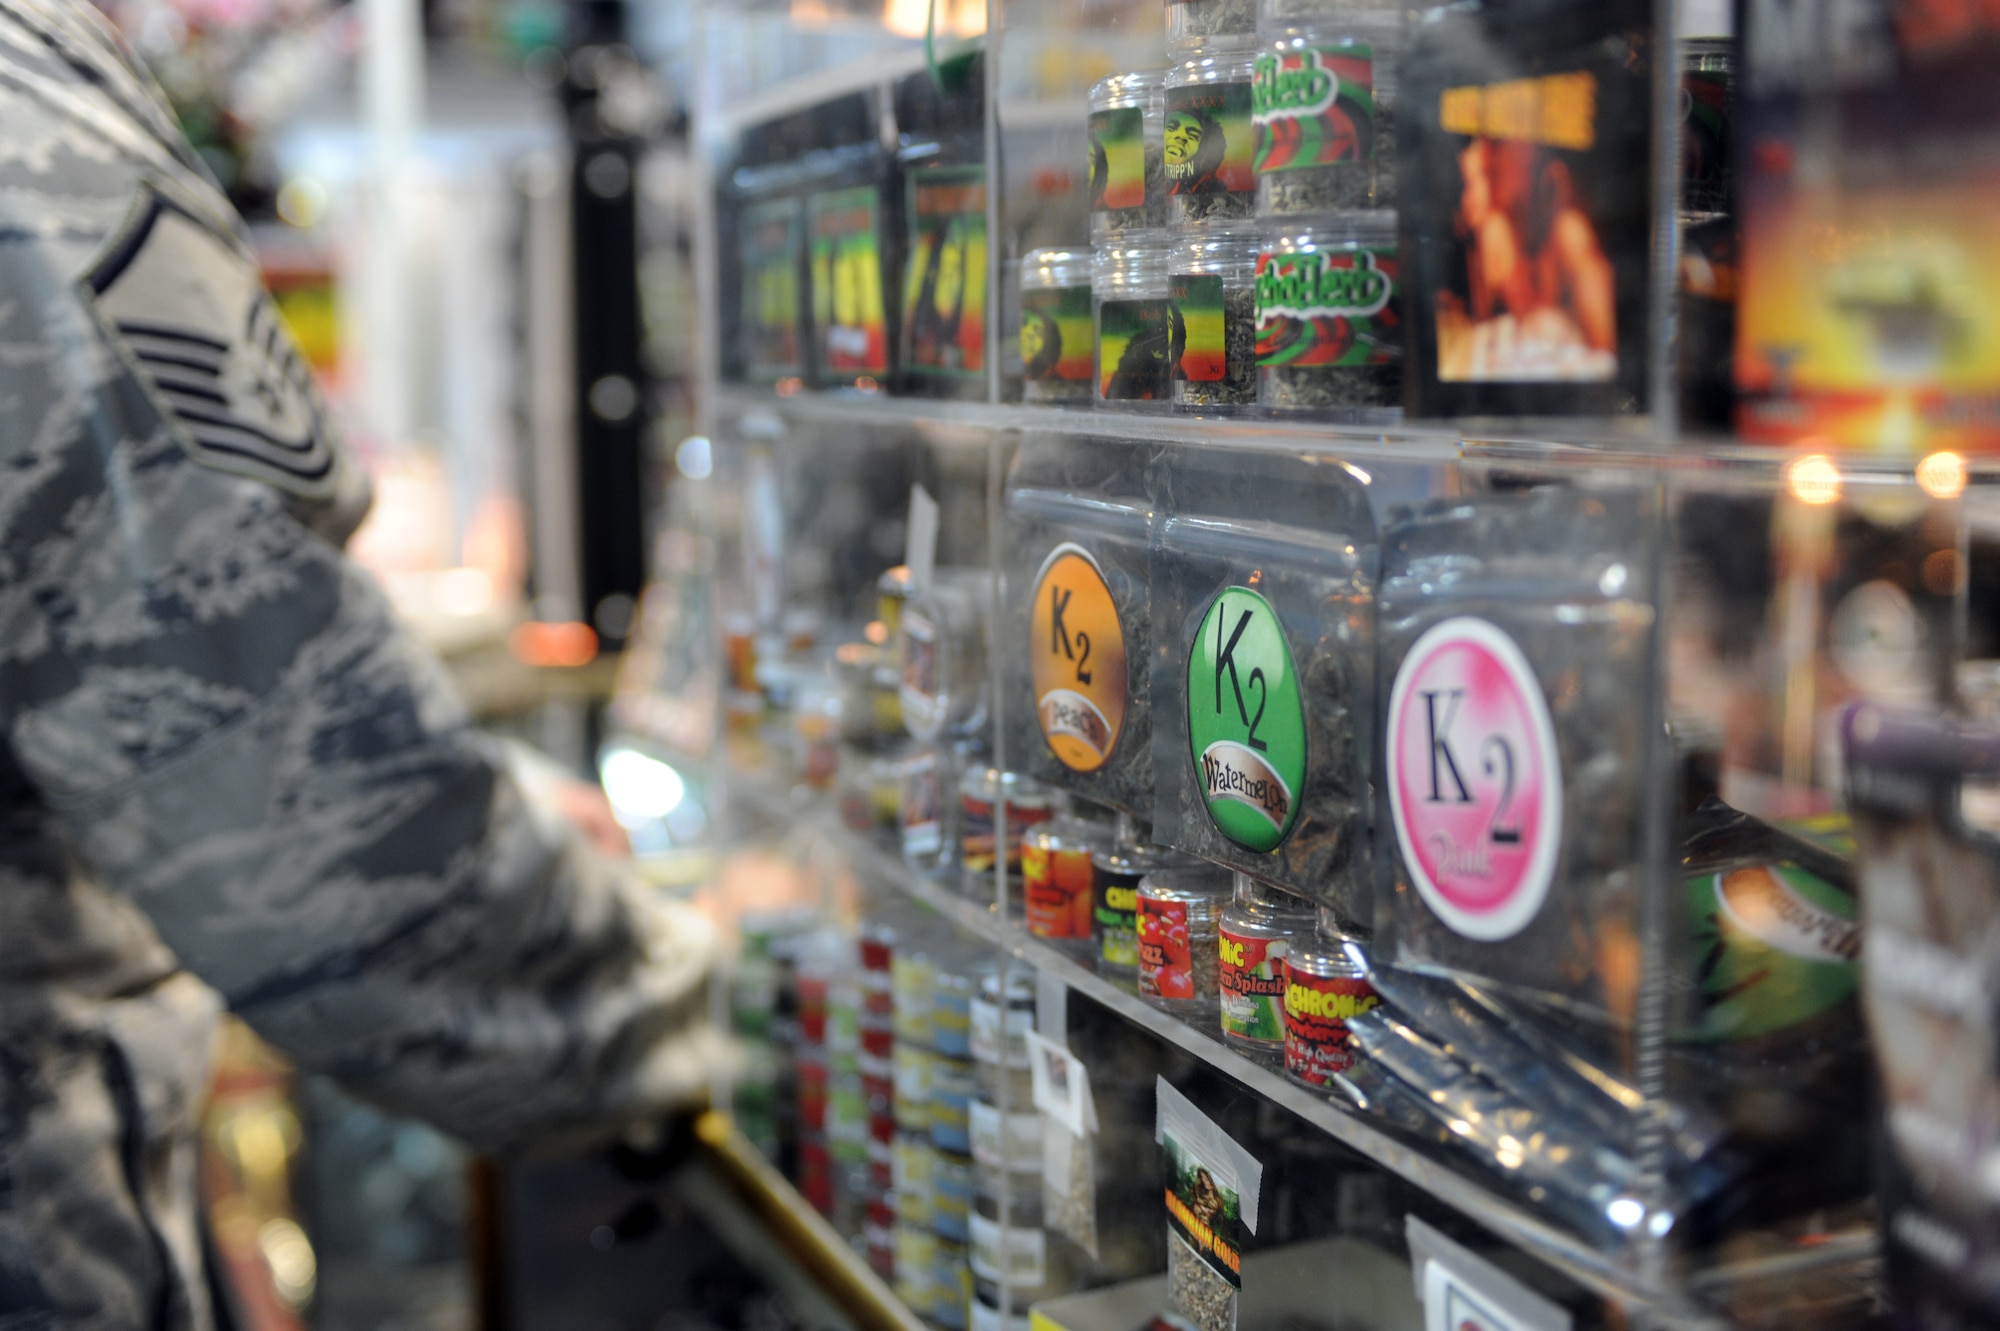 LAS VEGAS -- An Airman passes a spice display in a local smoke shop prior to a Nov. 24 ban on the substance by the Drug Enforcement Agency. Spice and other mood-altering substances are banned by the Air Force, but were legal to sell in the civilian community until the DEA used its emergency powers to implement a one-year ban of the substance. (U.S. Air Force photo illustration by Tech. Sgt. Michael R. Holzworth) 
